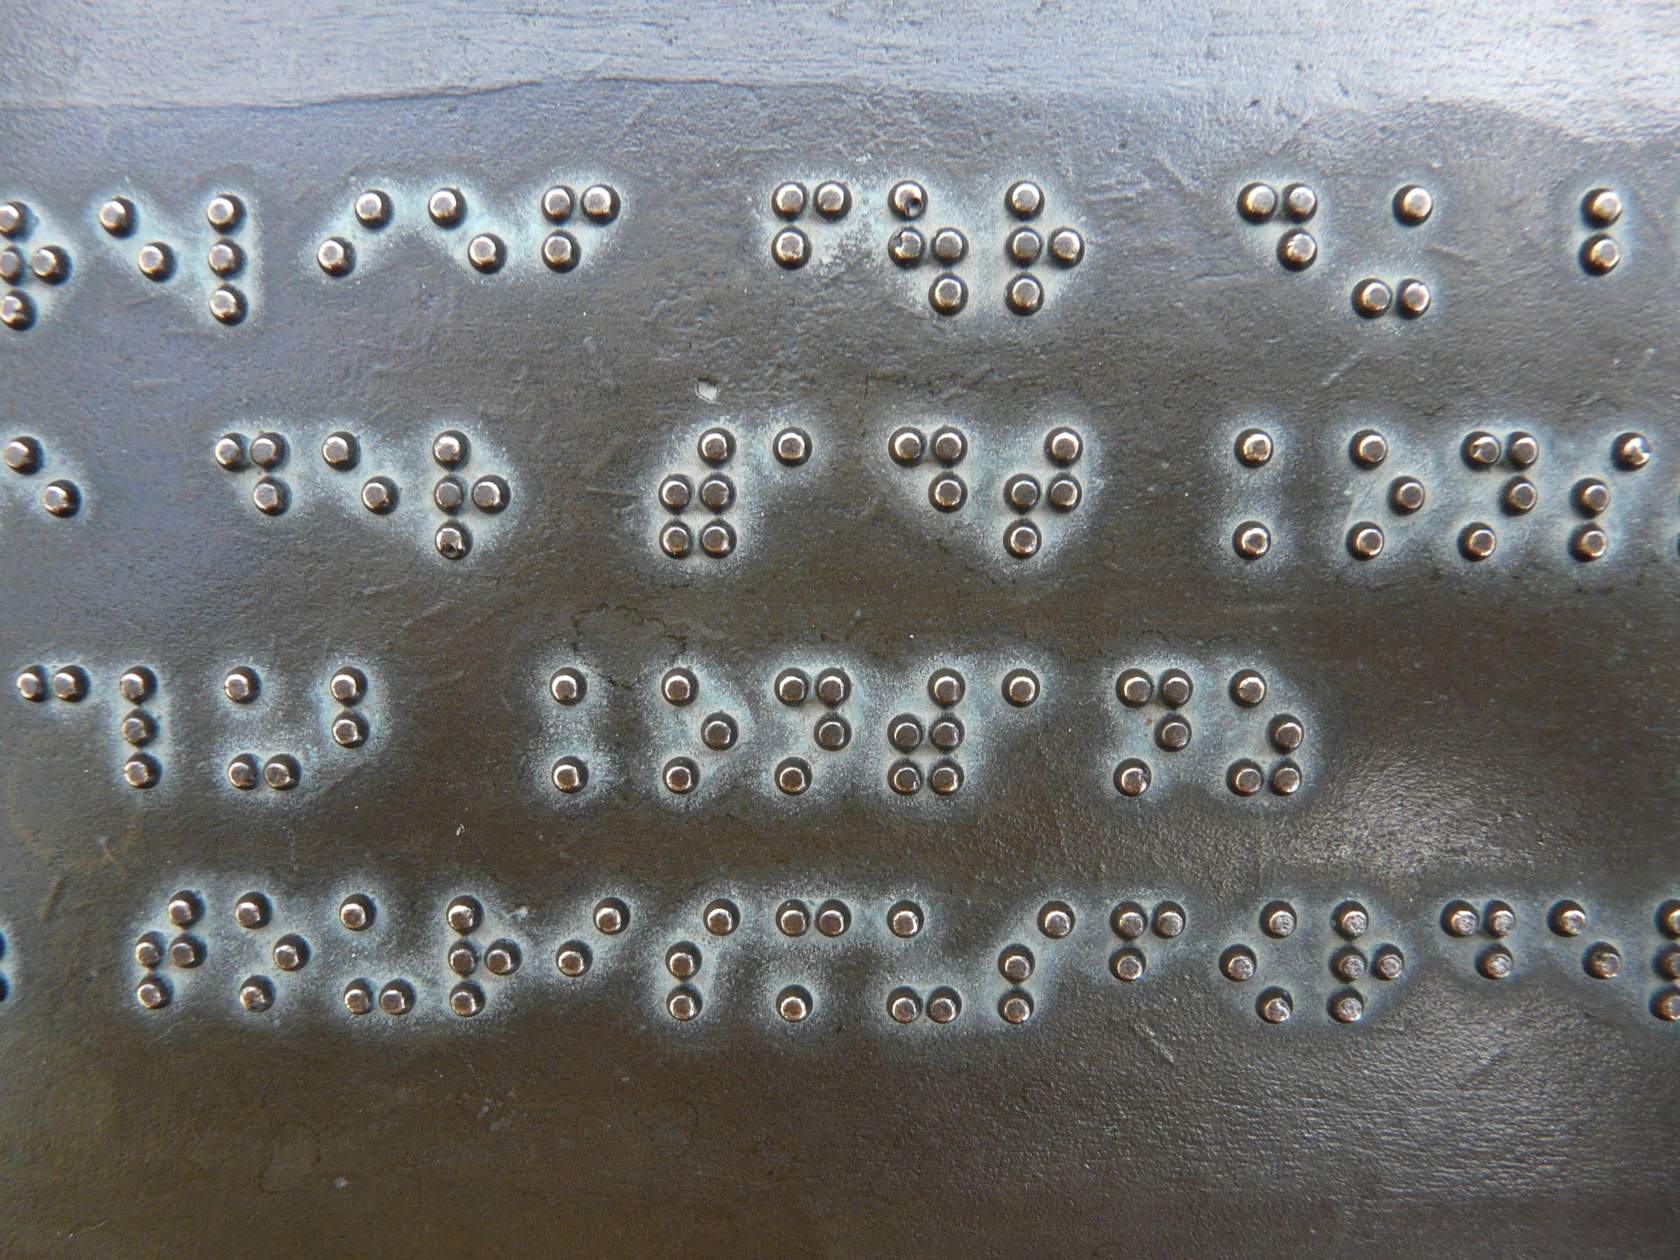 A close up of a metal plate with braille writing.